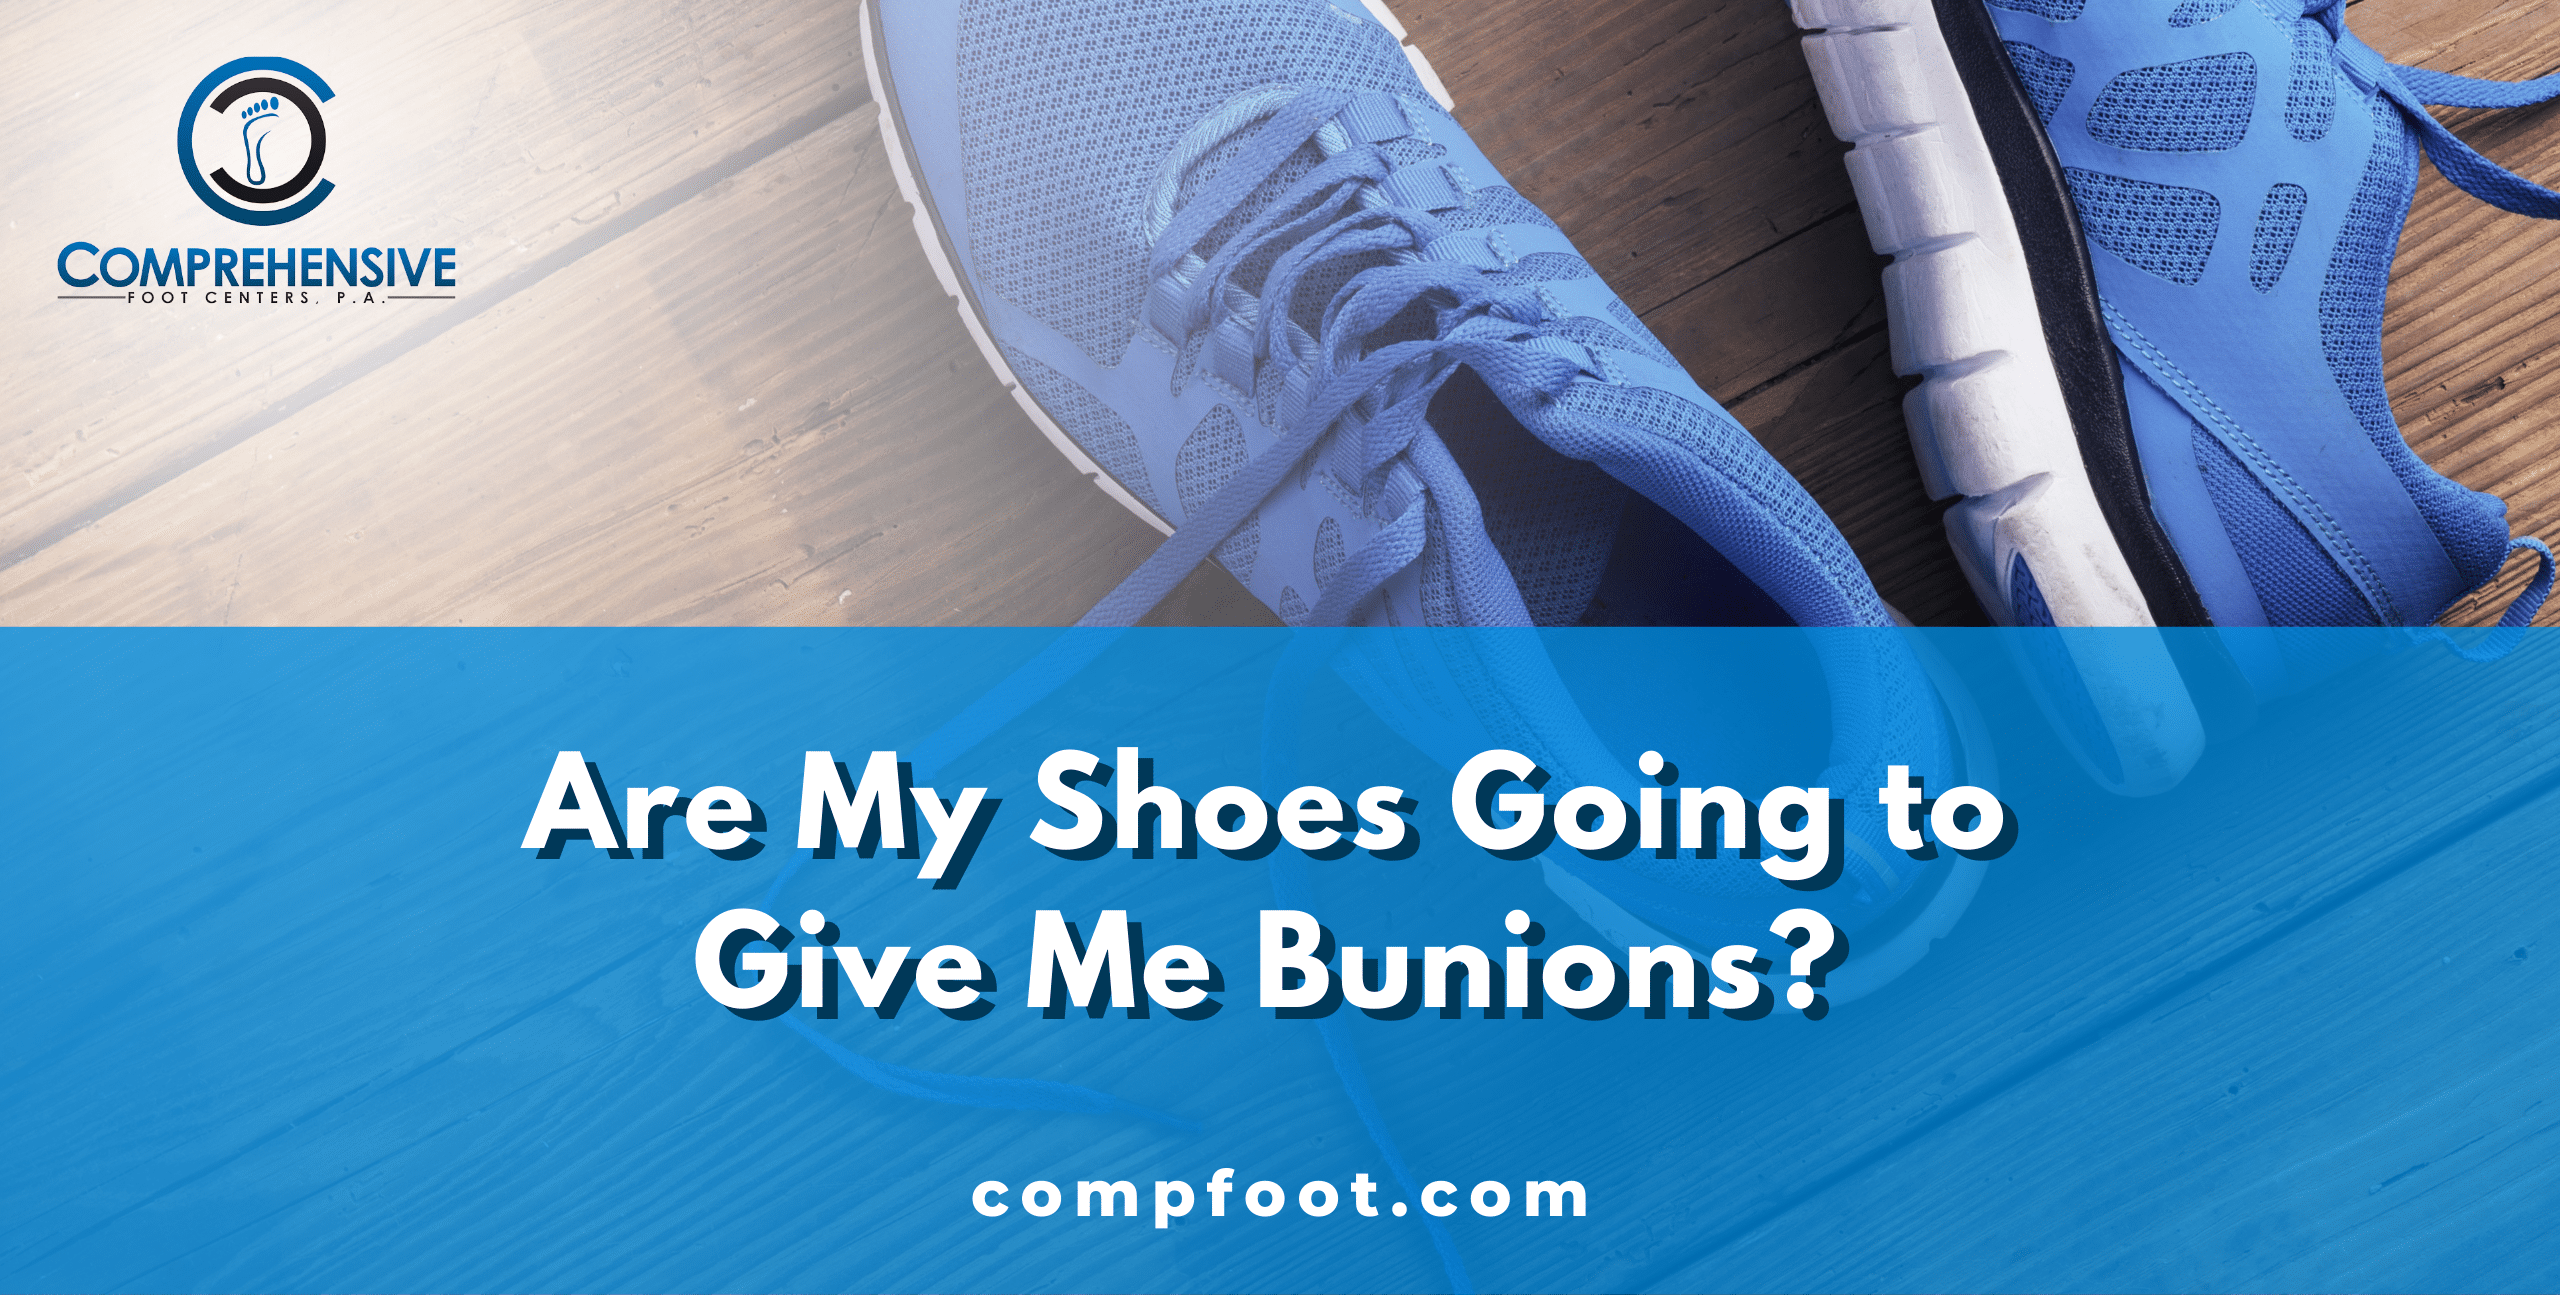 Bunions from shoes